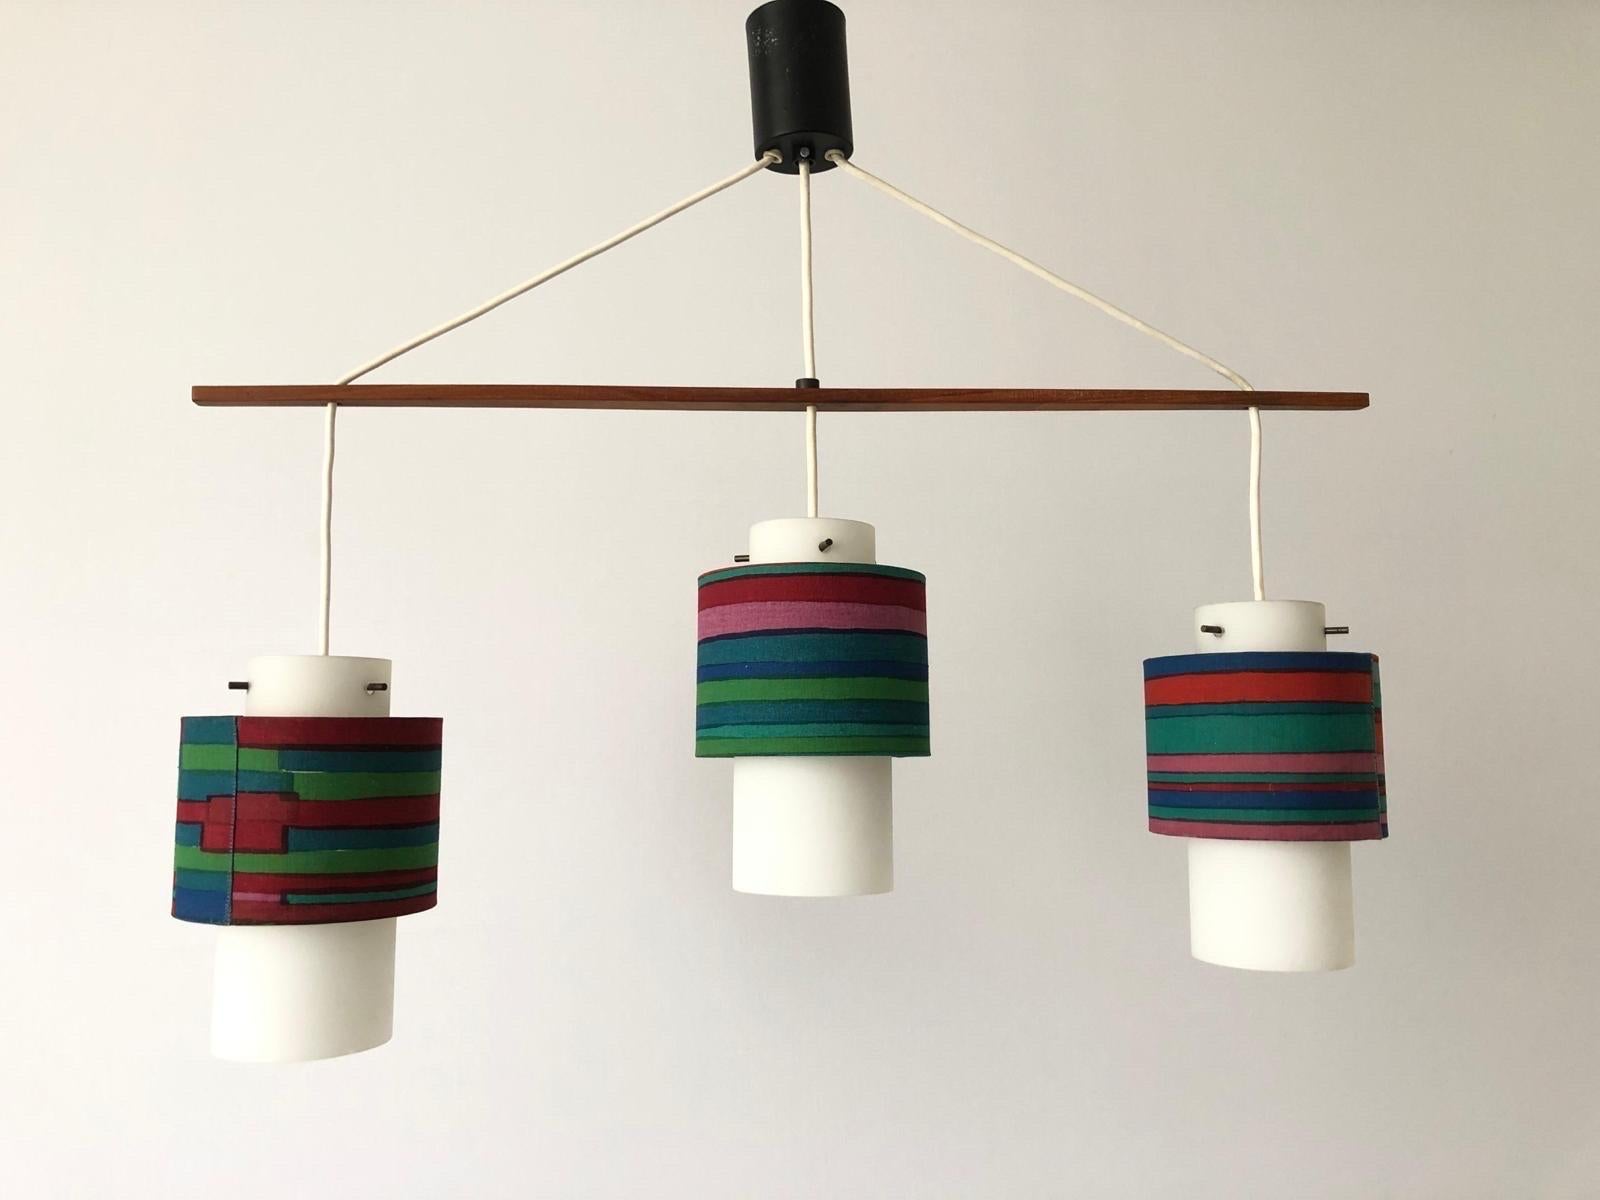 Retro Fabric Shade & Glass Triple Pendant Lamp, 1960s, Germany

This lamp works with 3x E14 light bulbs.

Measurements: 
Width and height: 68 cm and 60 cm
Shade diameter and height: 13 cm and 20 cm

